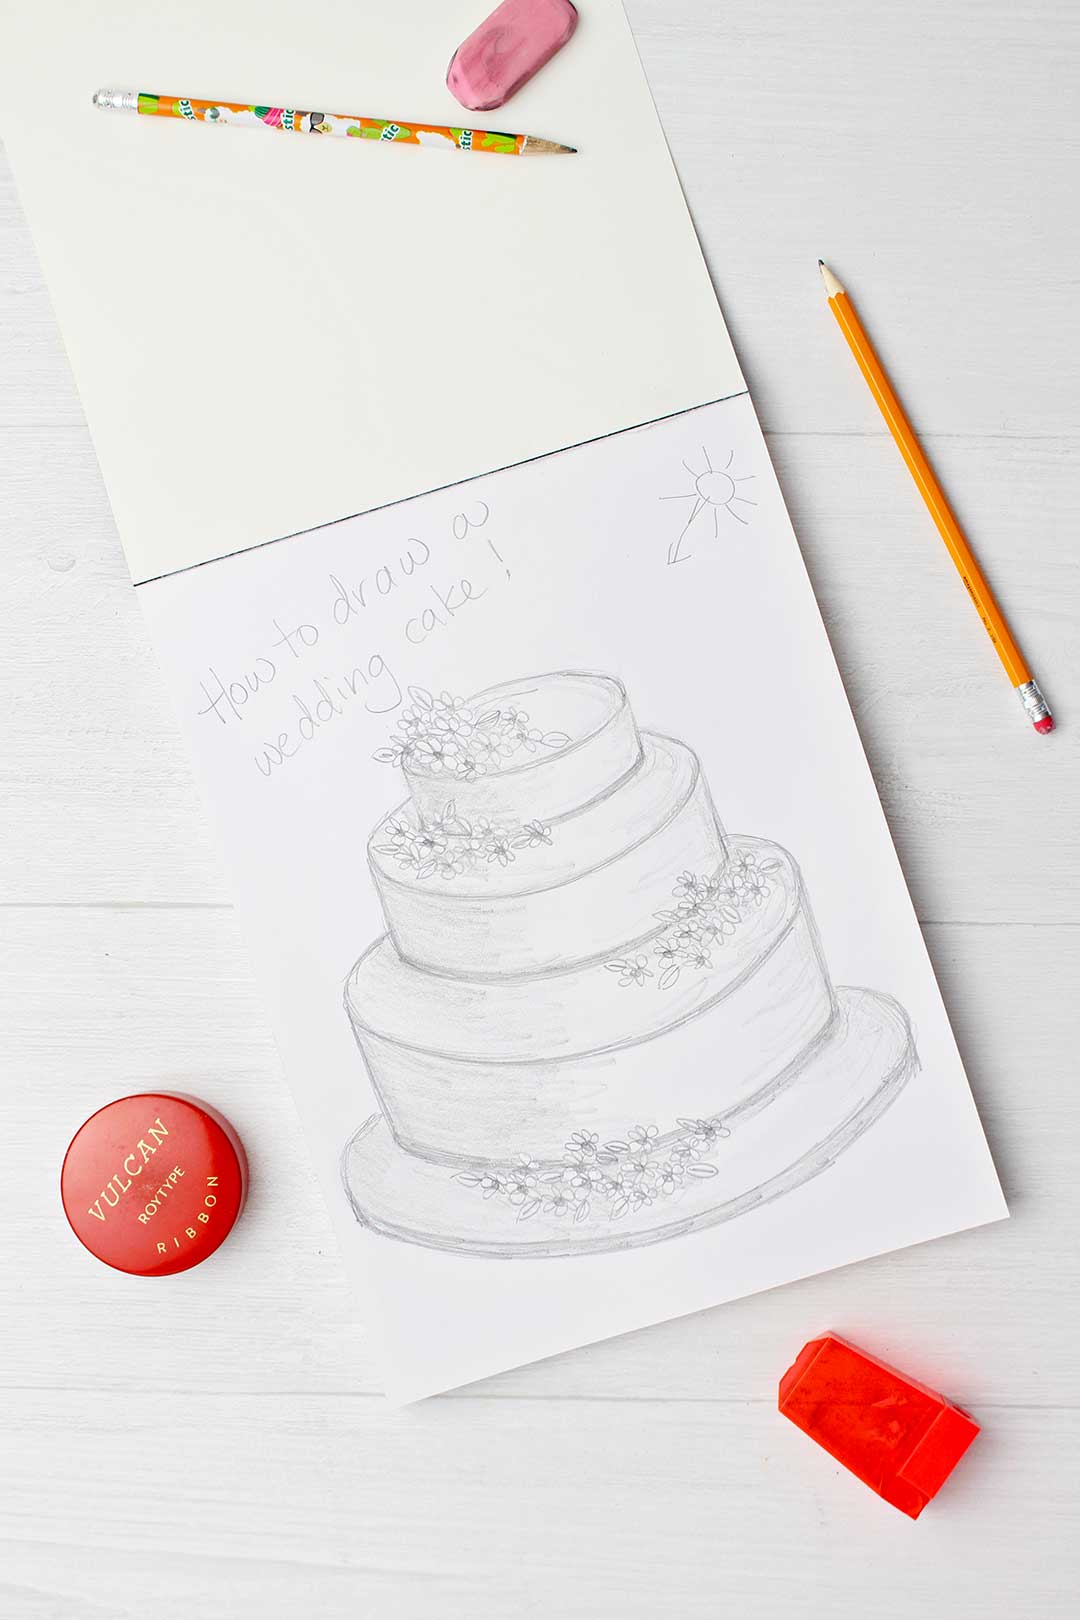 Final complete drawing of a wedding cake with pencil sharpener and pink eraser near by.